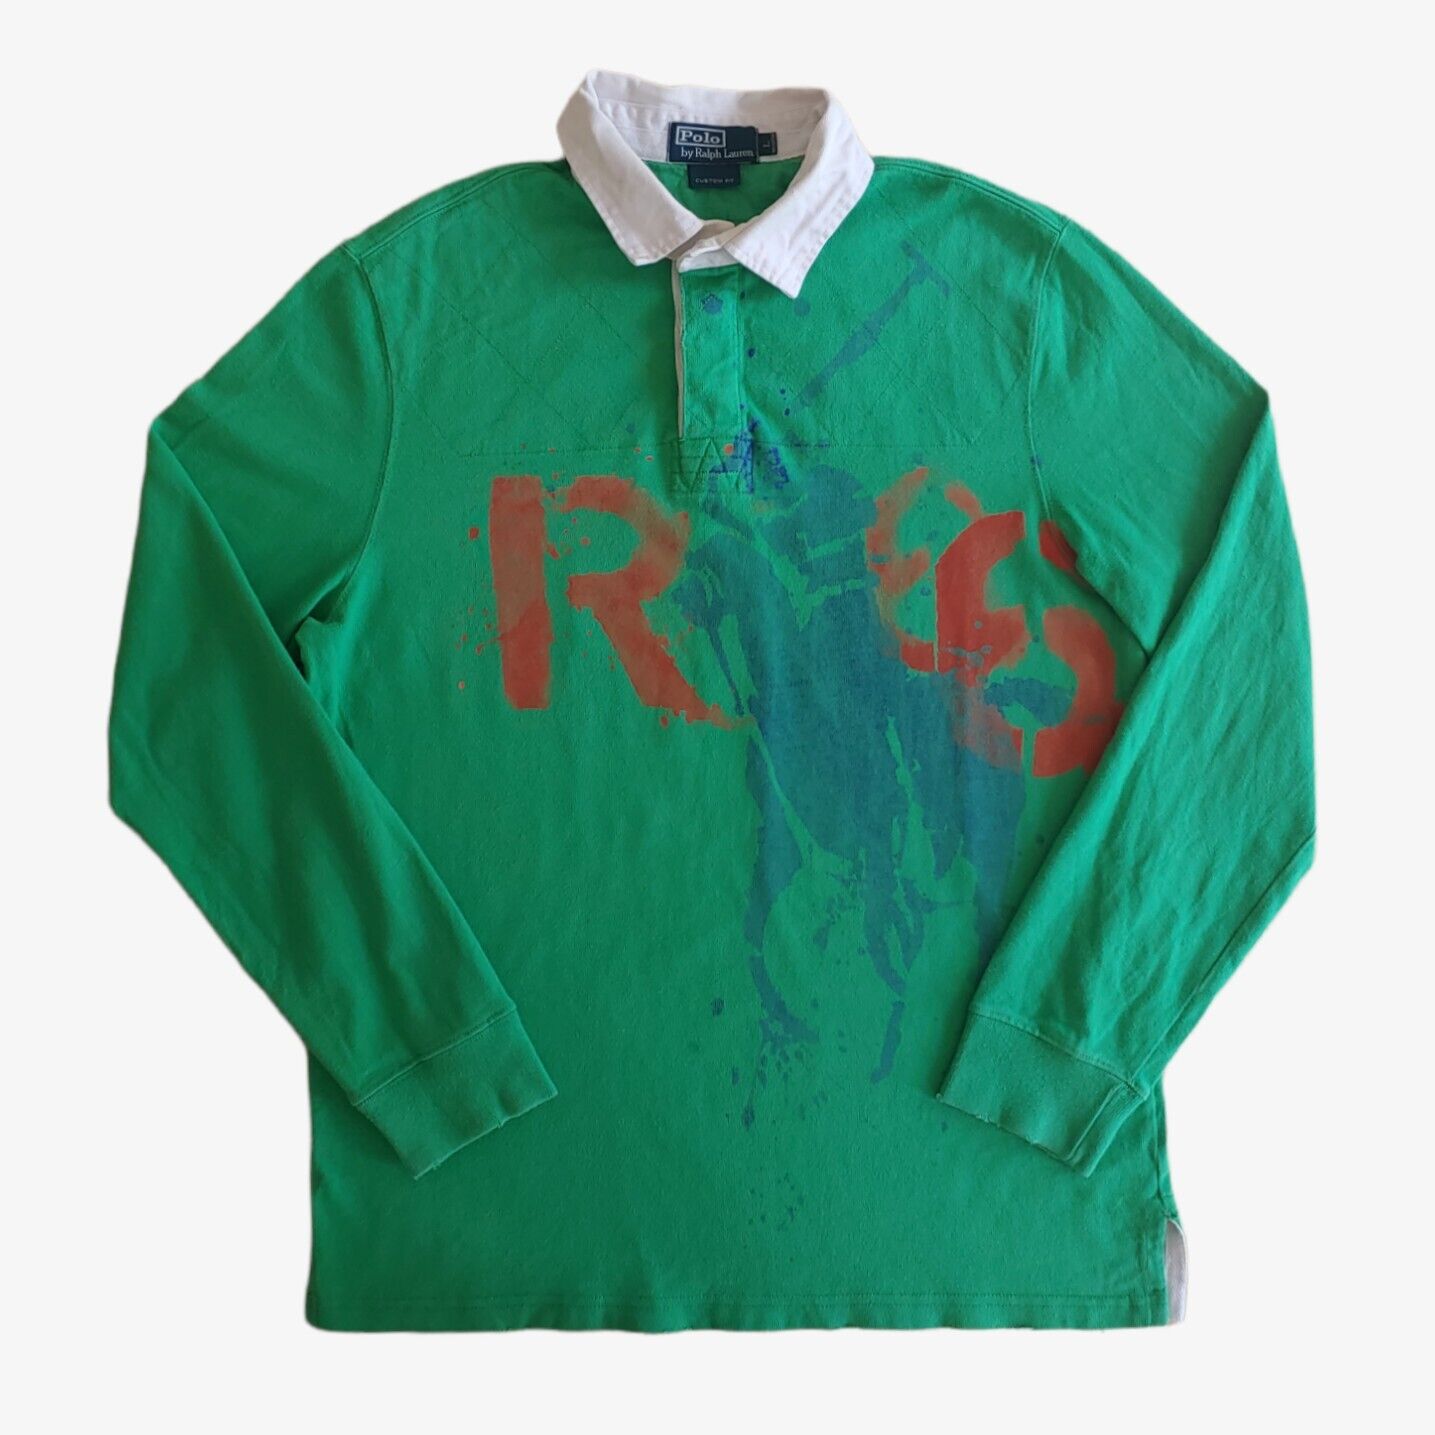 Vintage 90s Polo Ralph Lauren Green Long Sleeve Rugby Shirt With Big Spell Out Polo Player Logo Graphic Print - Casspios Dream